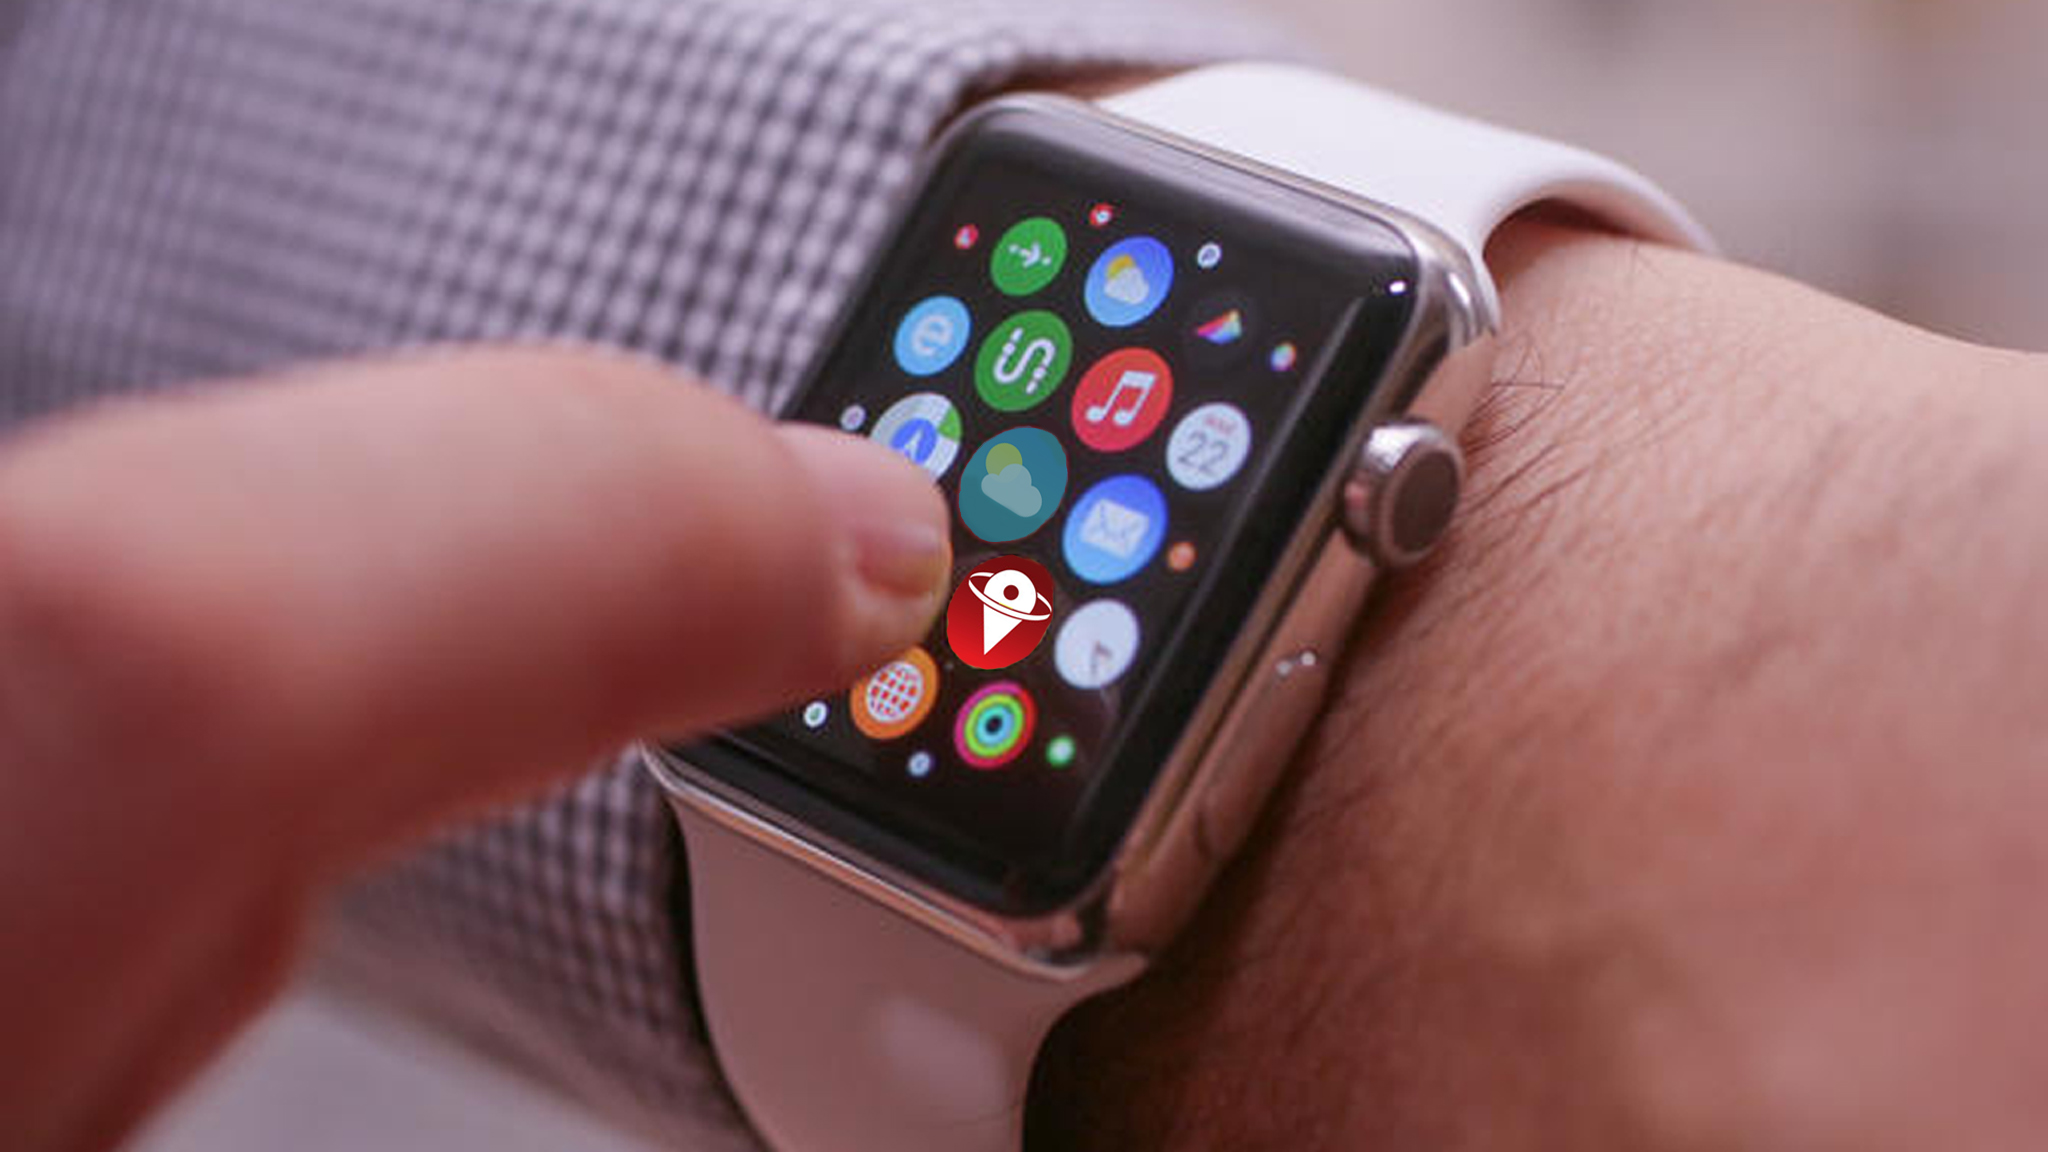 Smart Watch selection tool, buying guide and much more